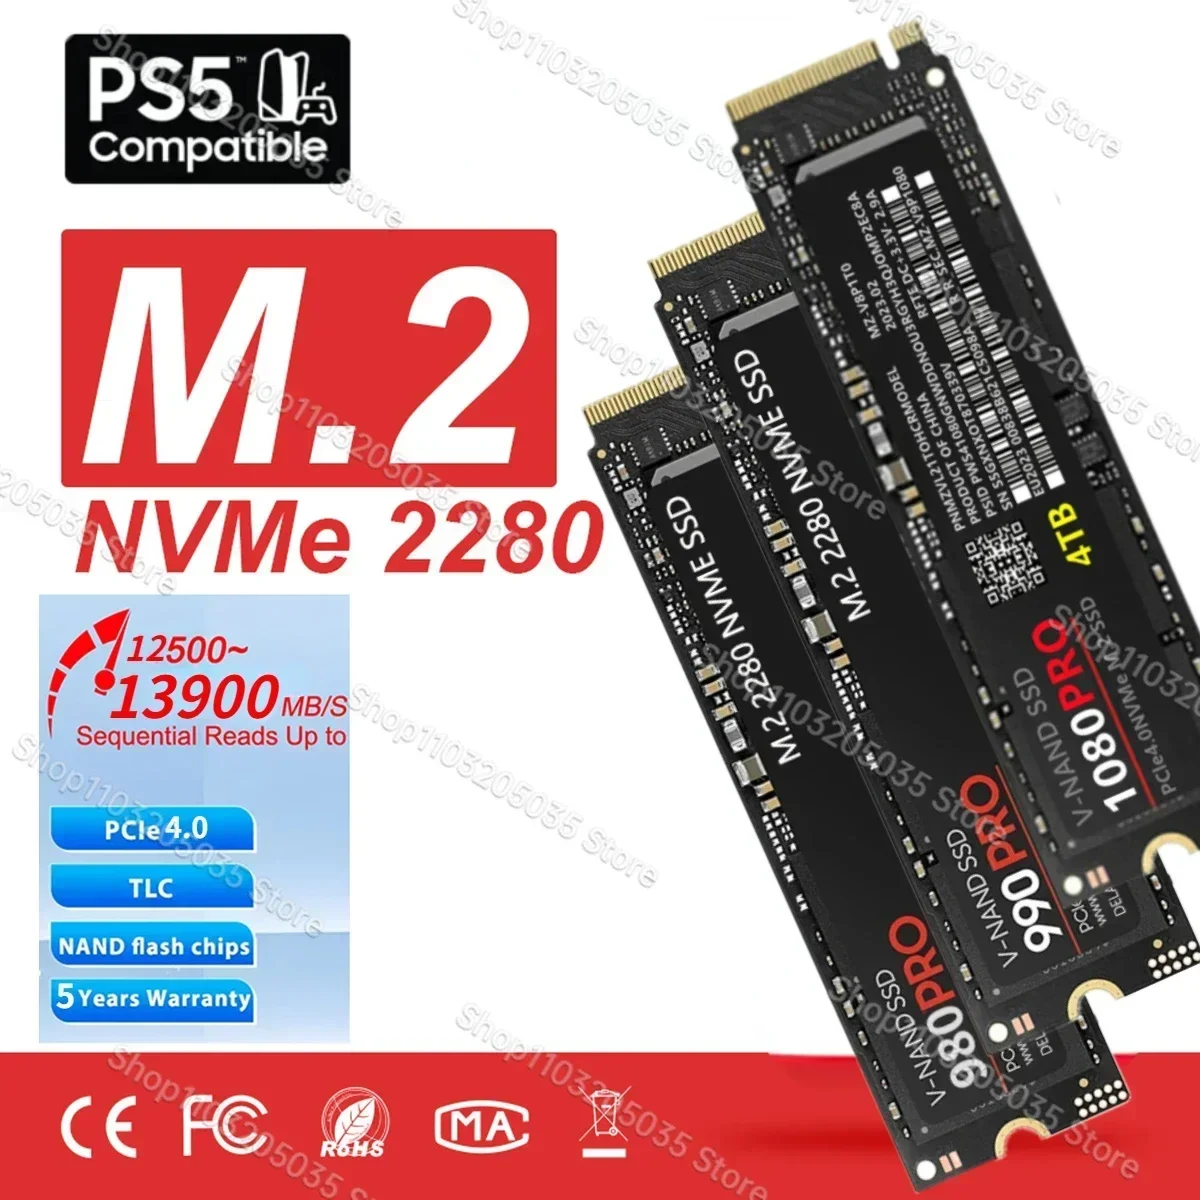 

Hard Drive Disk NVME Ｍ2 SSD 4TB 2TB 1TB High-speed NMVE M2 SSD Ssd Sata PCIE 4.0 2280 Solid State Drive Hard HDD for Laptop PS5